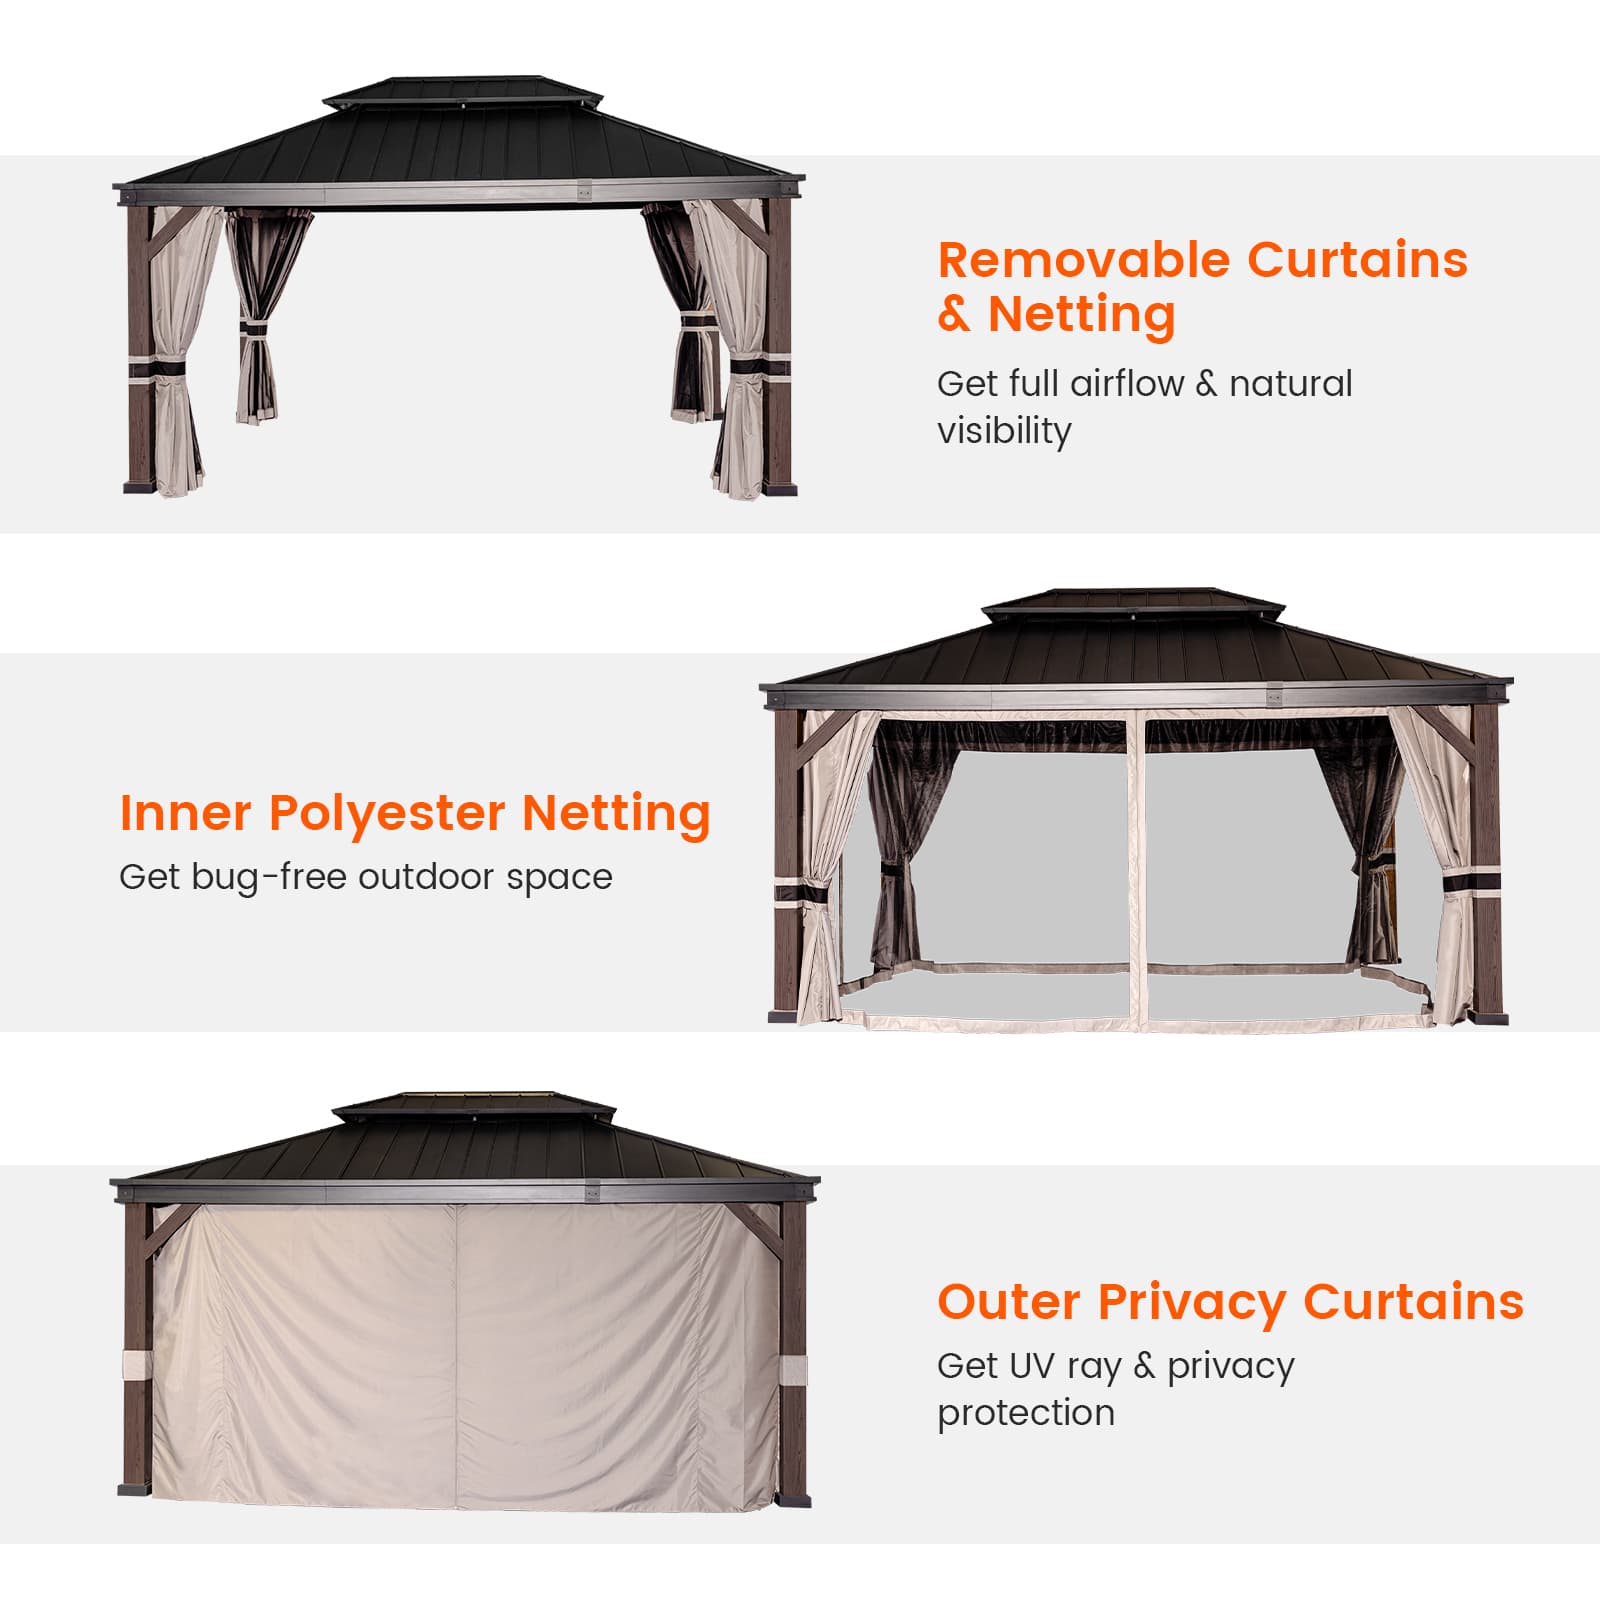 Olilawn 12' x 16' Alps Hardtop Gazebo with Double Roof, Aluminum Frame, Curtains & Netting